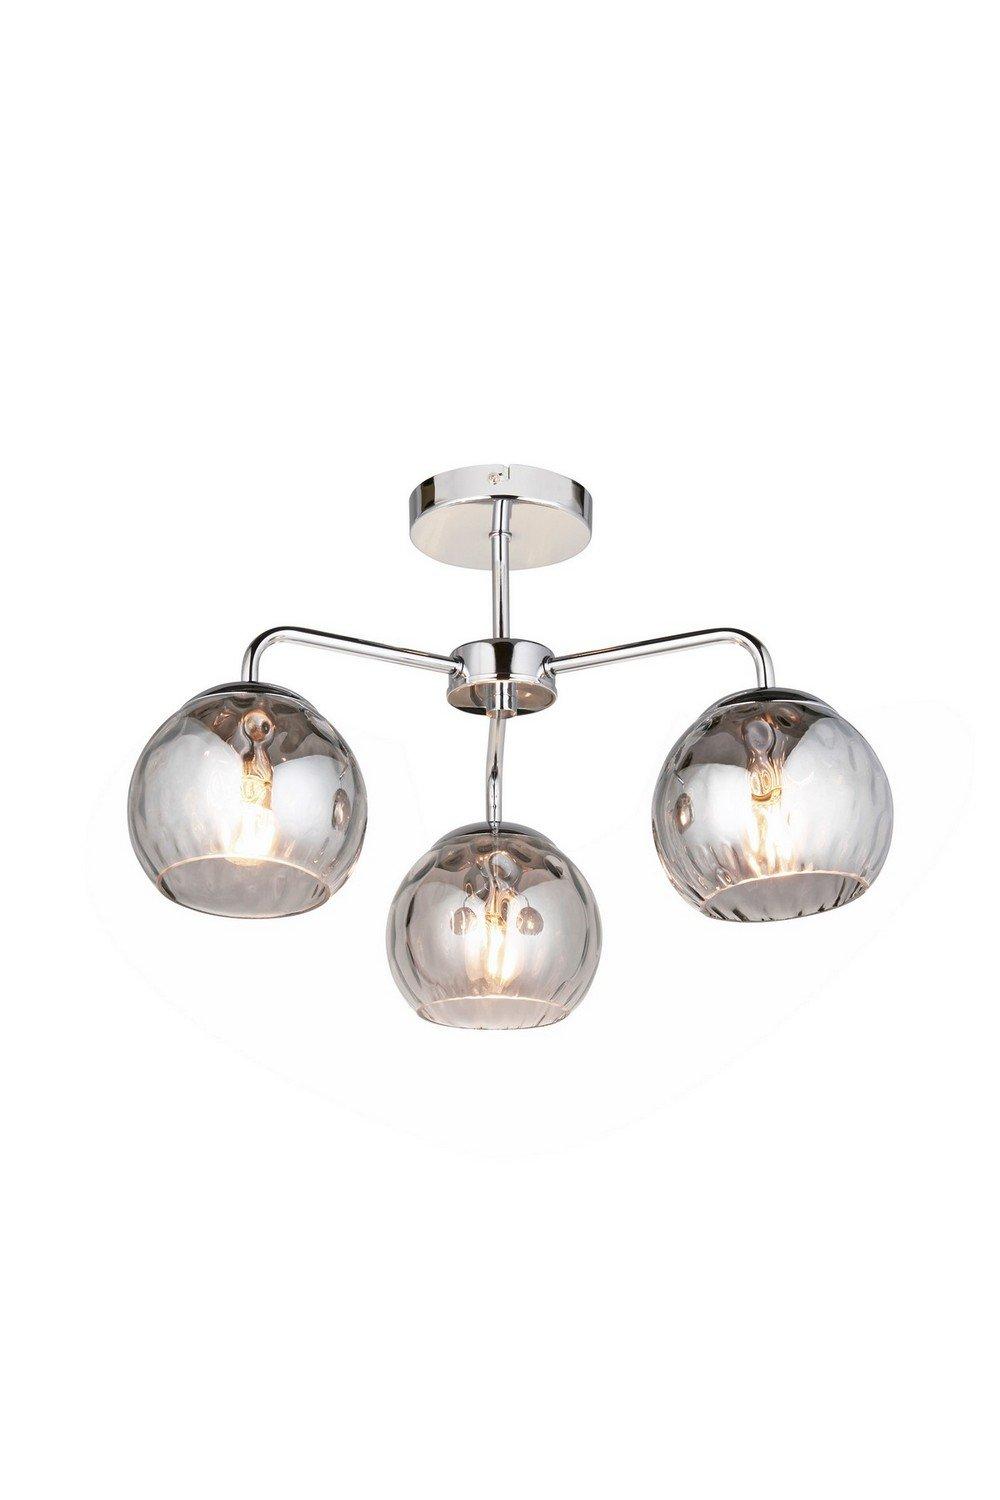 Dimple Multi Arm Glass Semi Flush Ceiling Lamp Chrome Plate Smoked Mirror Glass